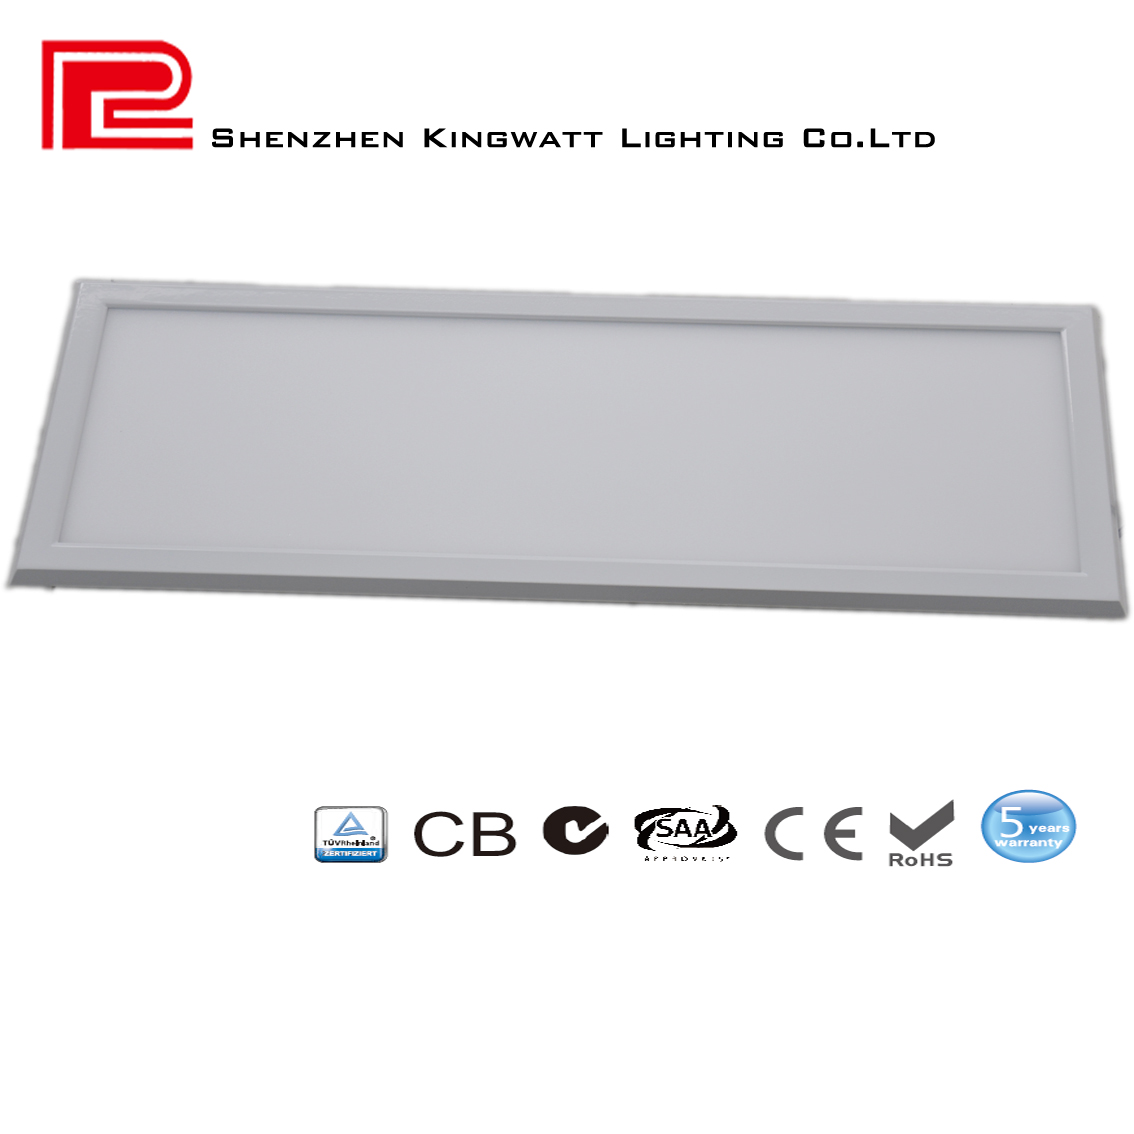 CB/CTEL/SAA/RoHS 100Lm/W LED Panel Light，620mm*620mm with 40W